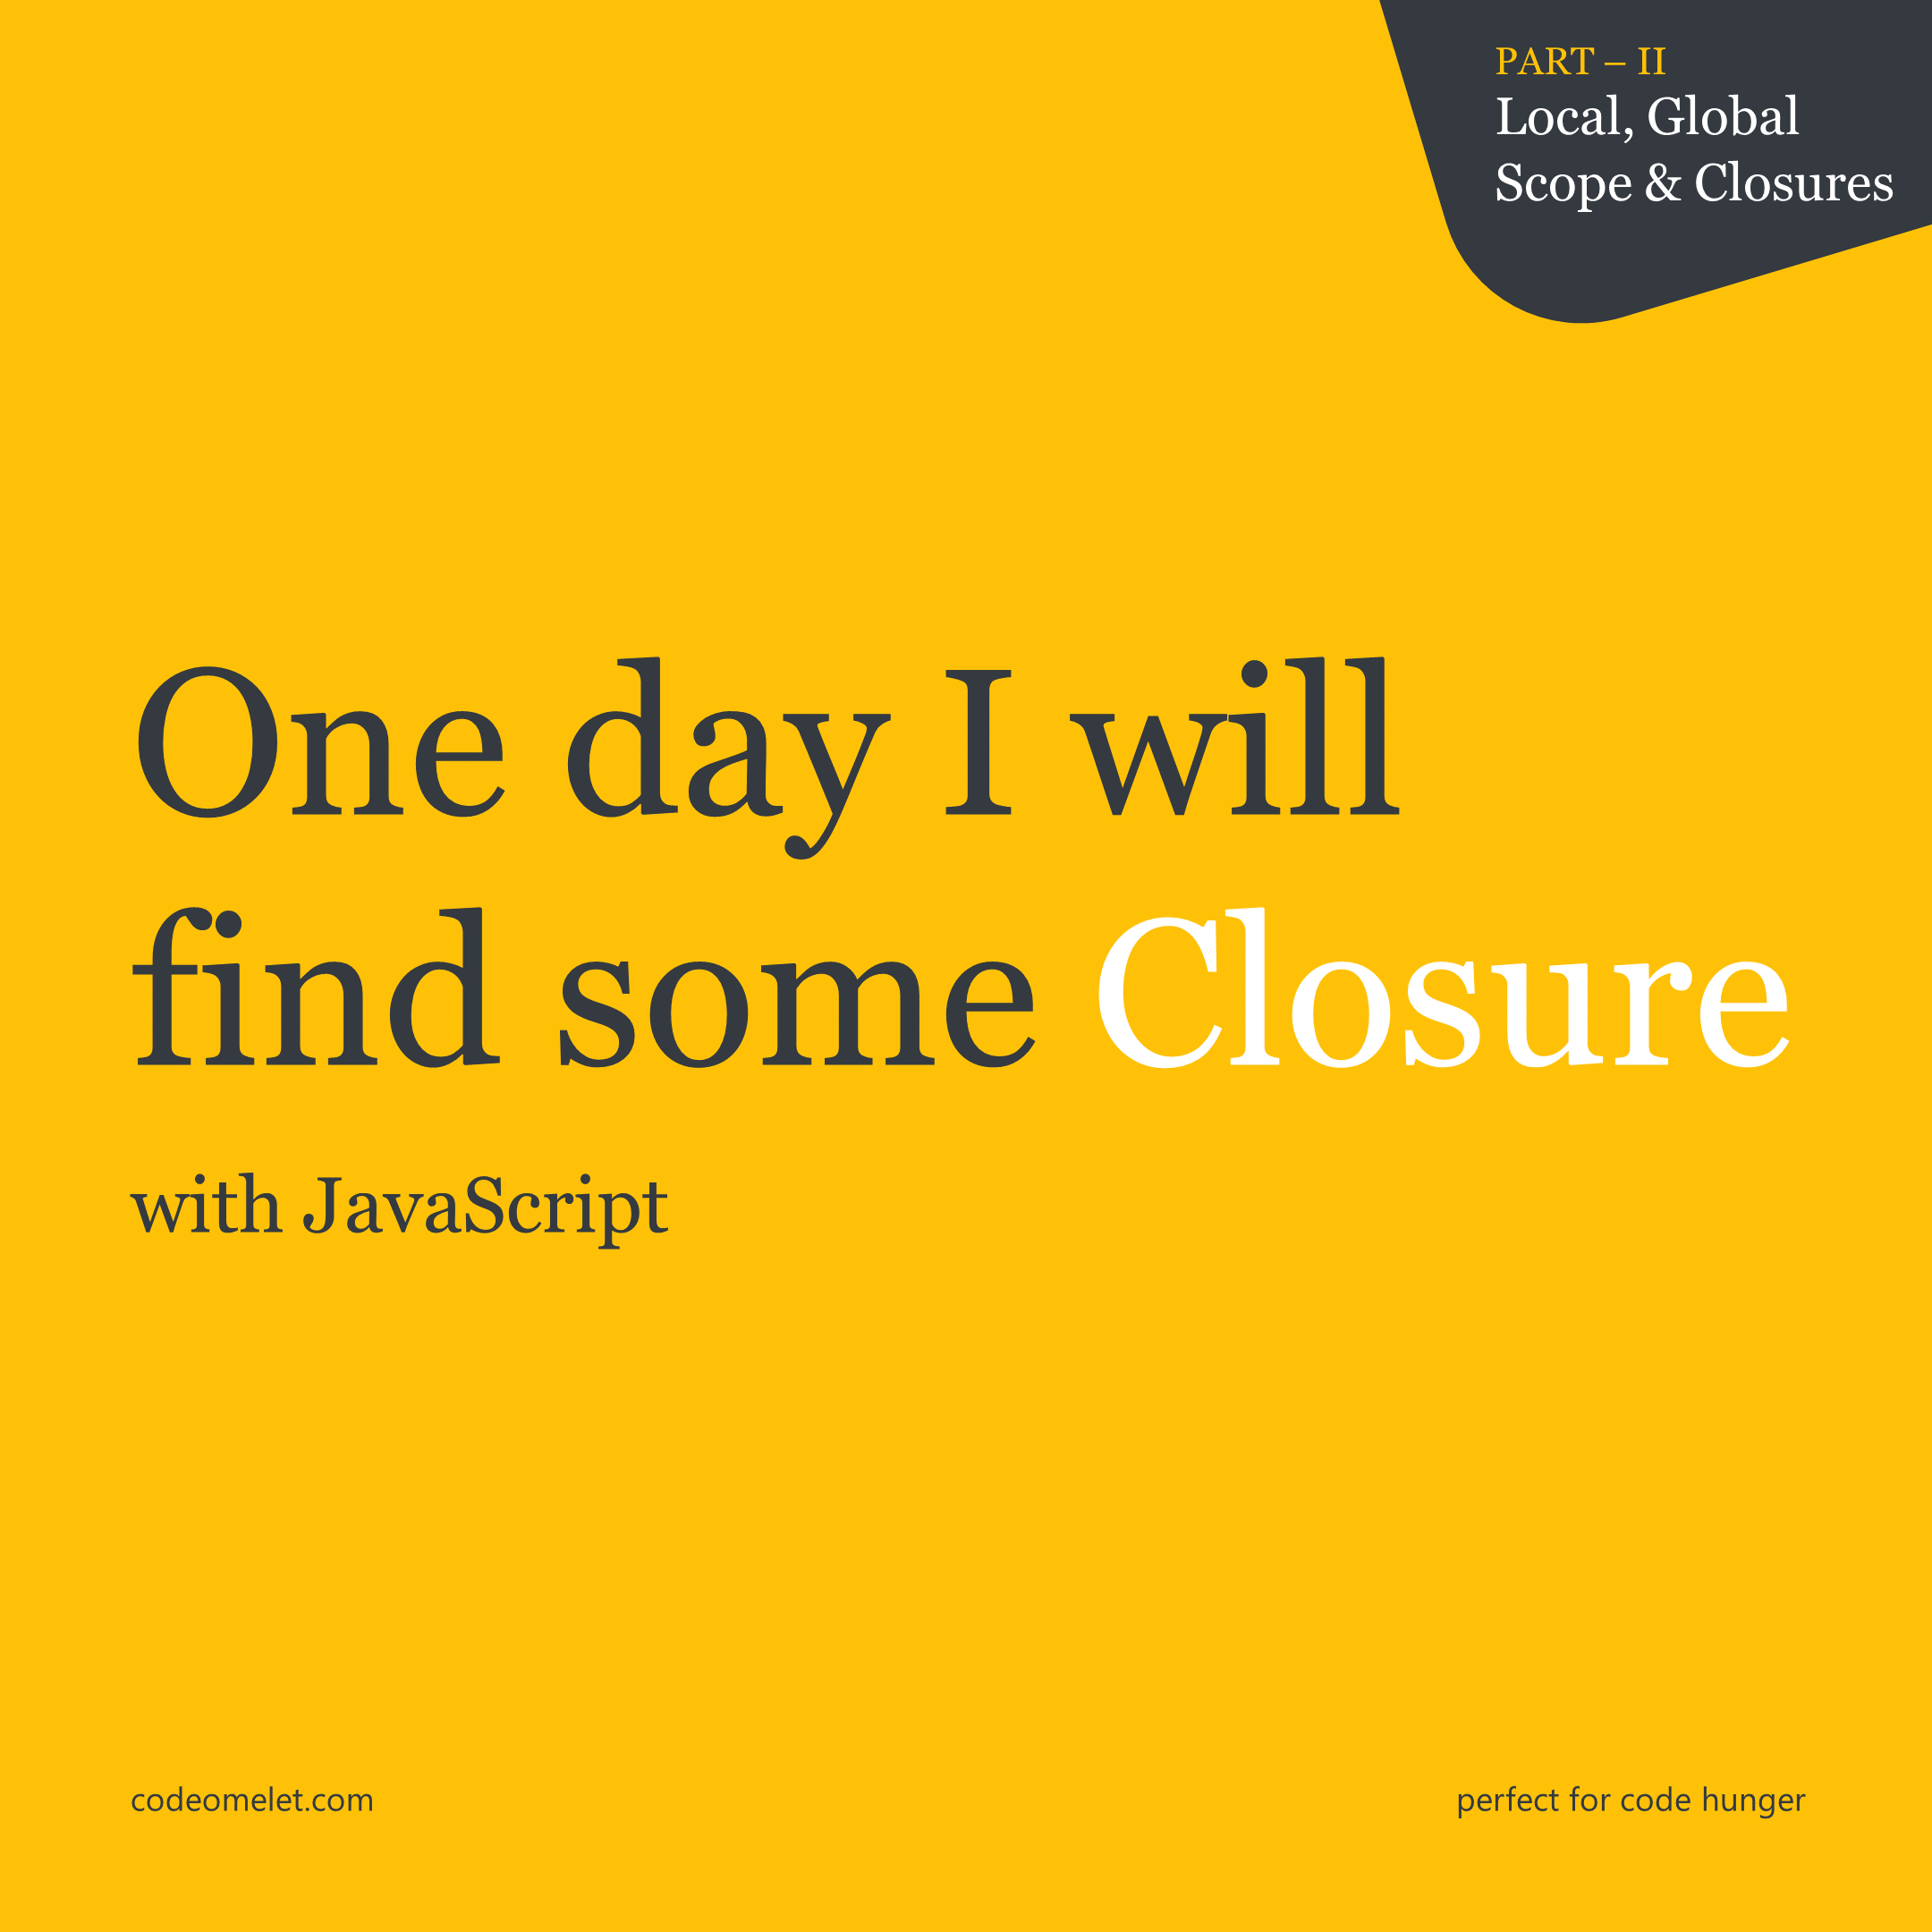 One day I will find some Closure - Local, Global Scope & Closures